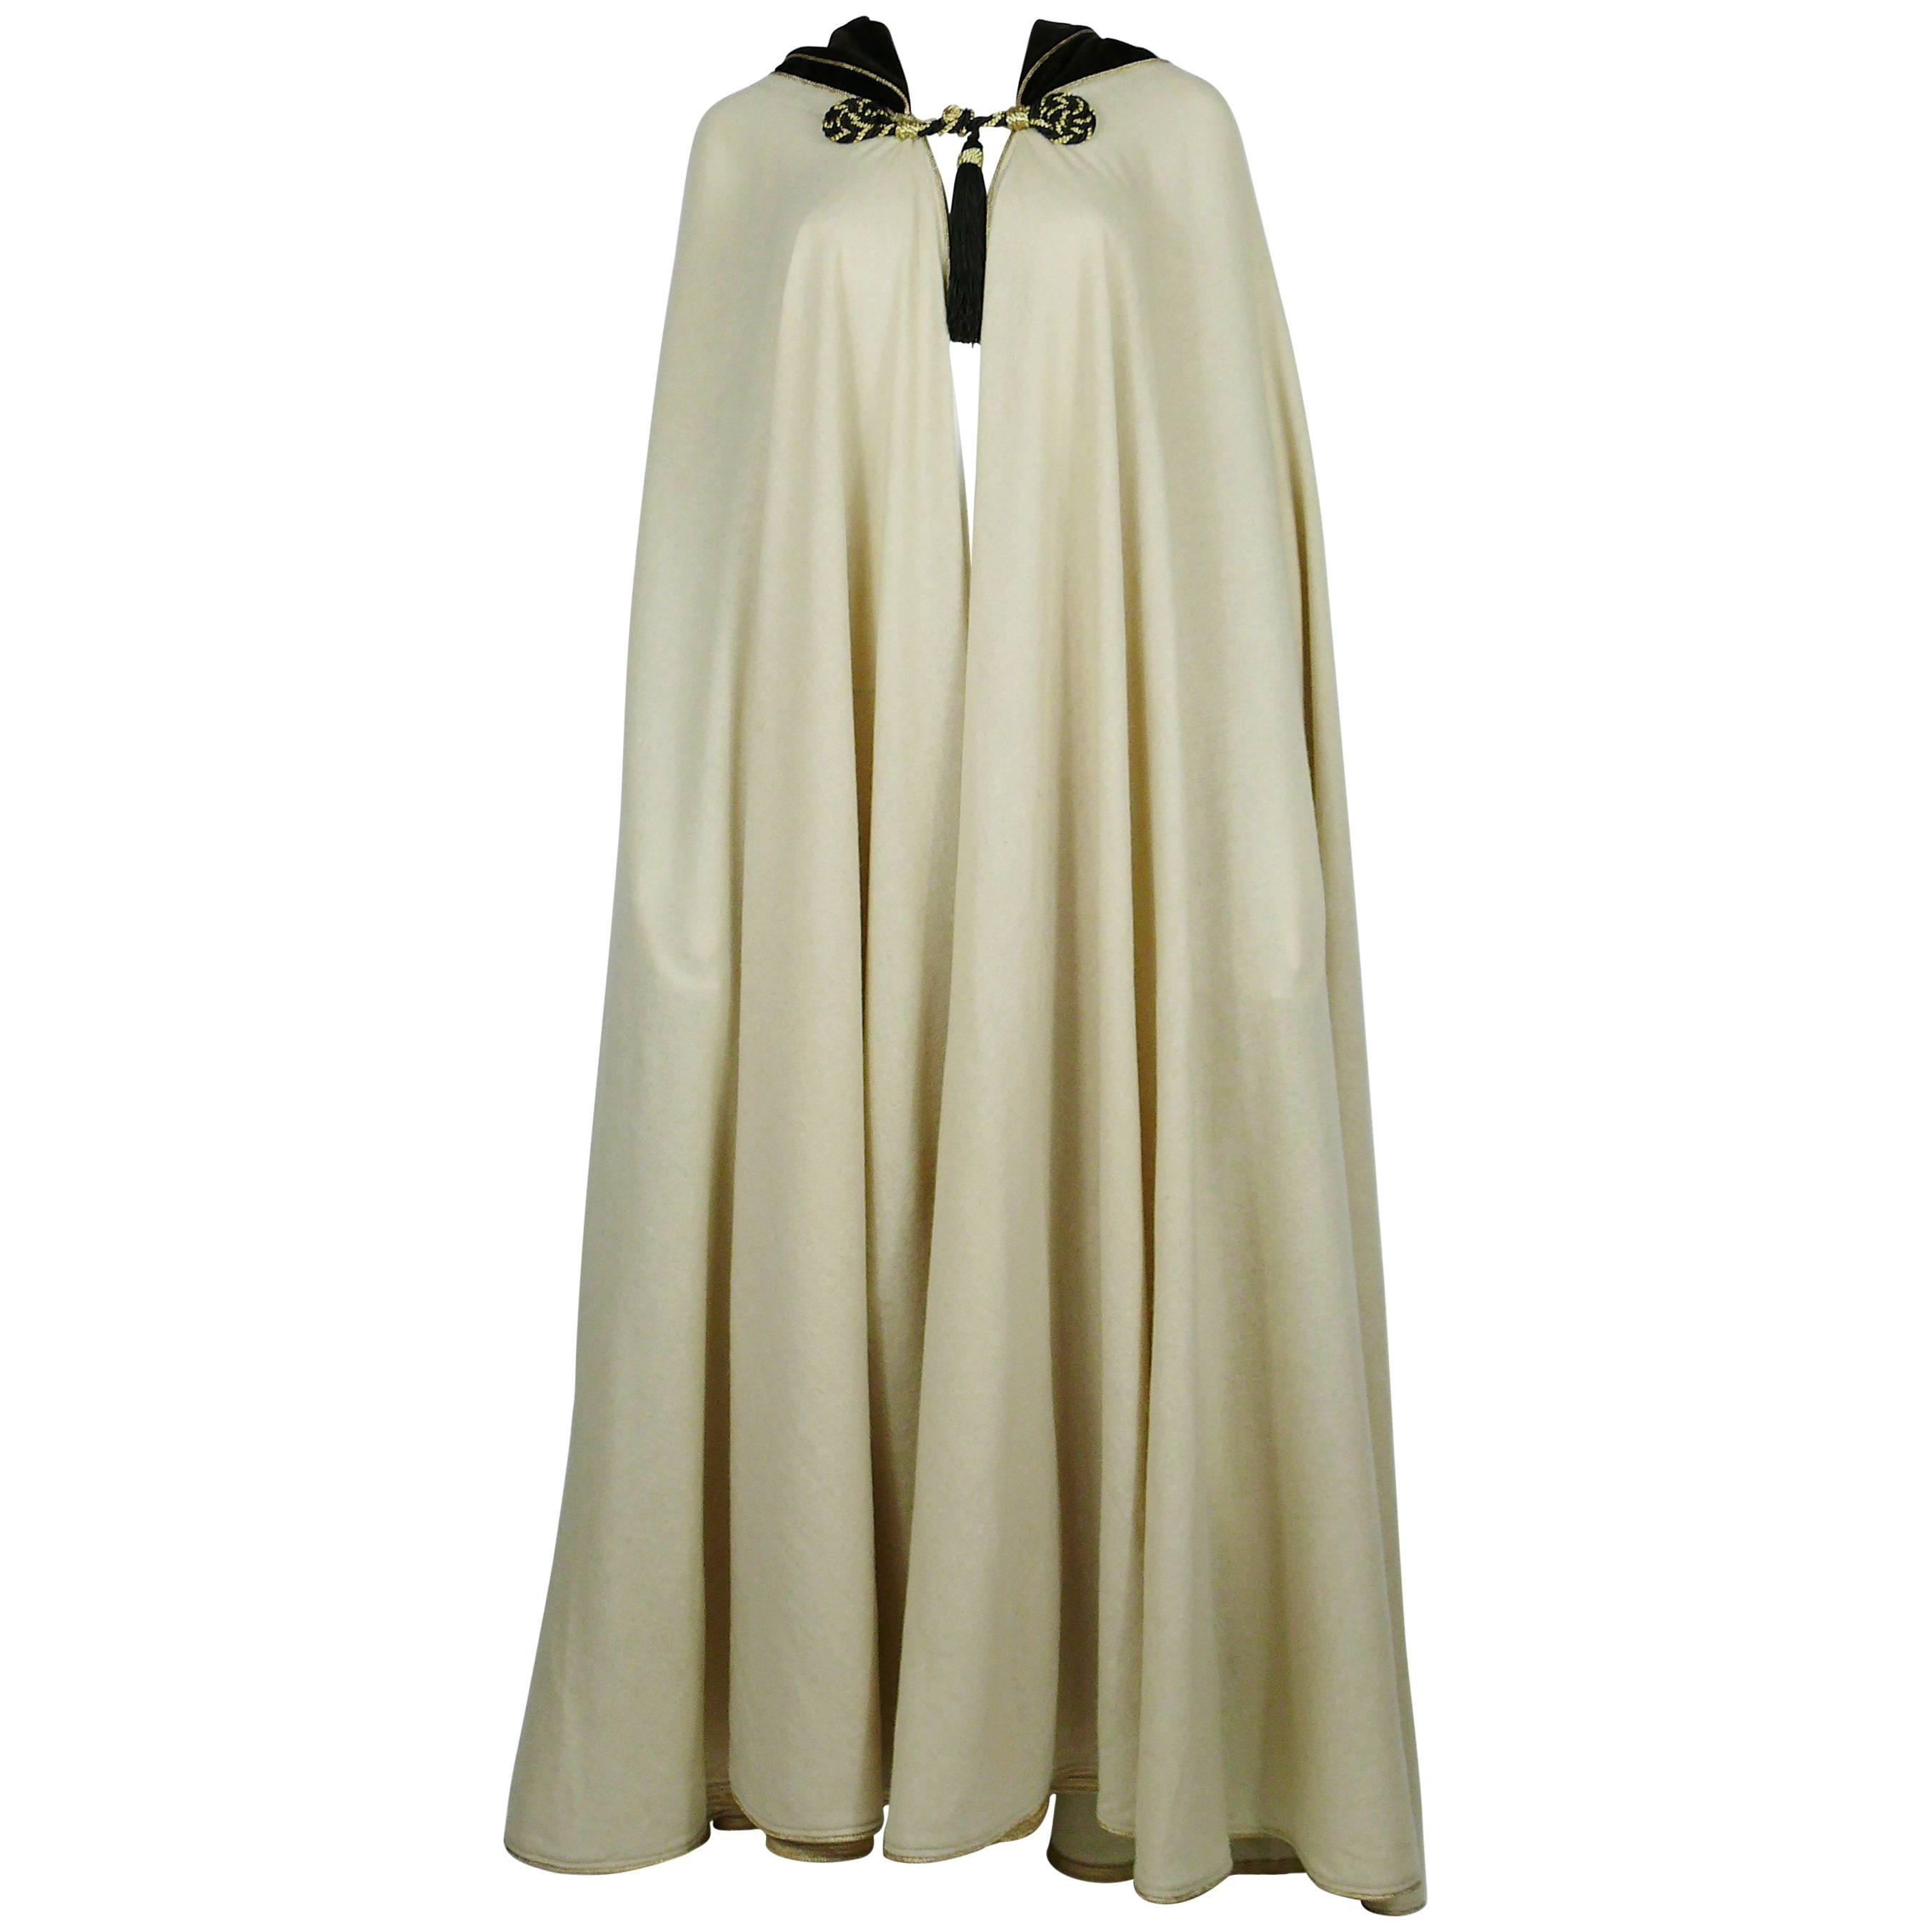 Yves Saint Laurent Vintage 1976 Rare Moroccan Inspired Hooded Cape For Sale